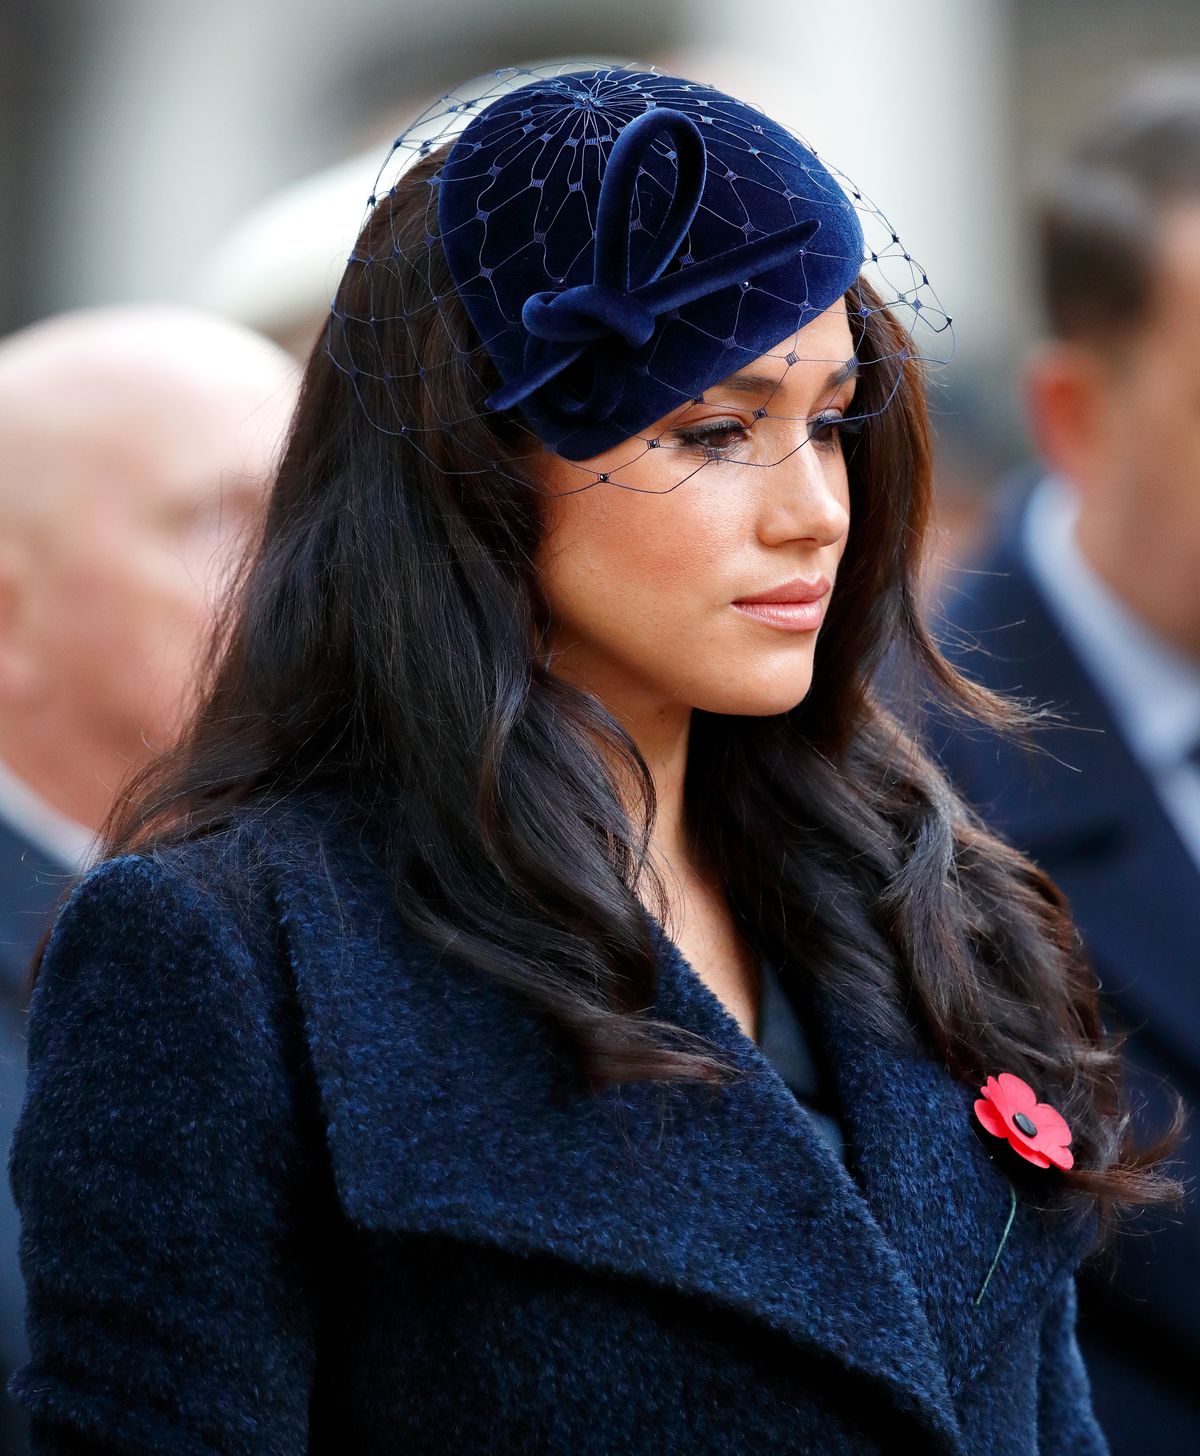 Duchess Meghan at the 91st Field of Remembrance at Westminster Abbey on November 7, 2019, in London, England | Photo: Max Mumby/Indigo/Getty Images